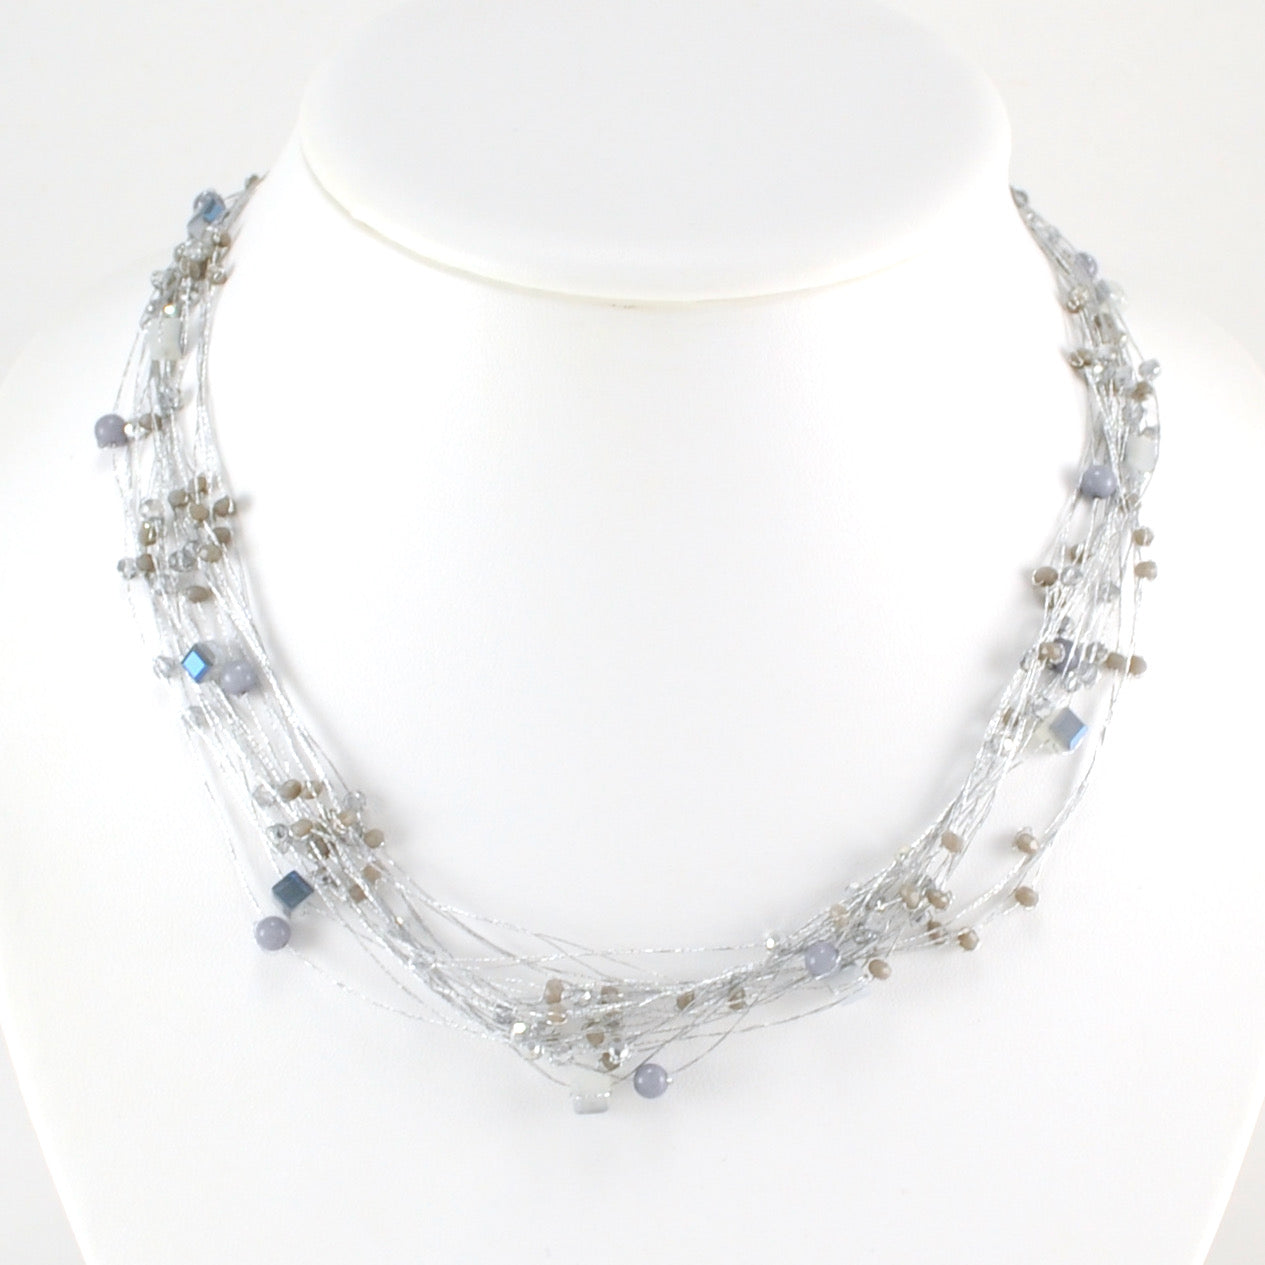 Japanese Silk Charcoal Pearls and Crystal Necklace